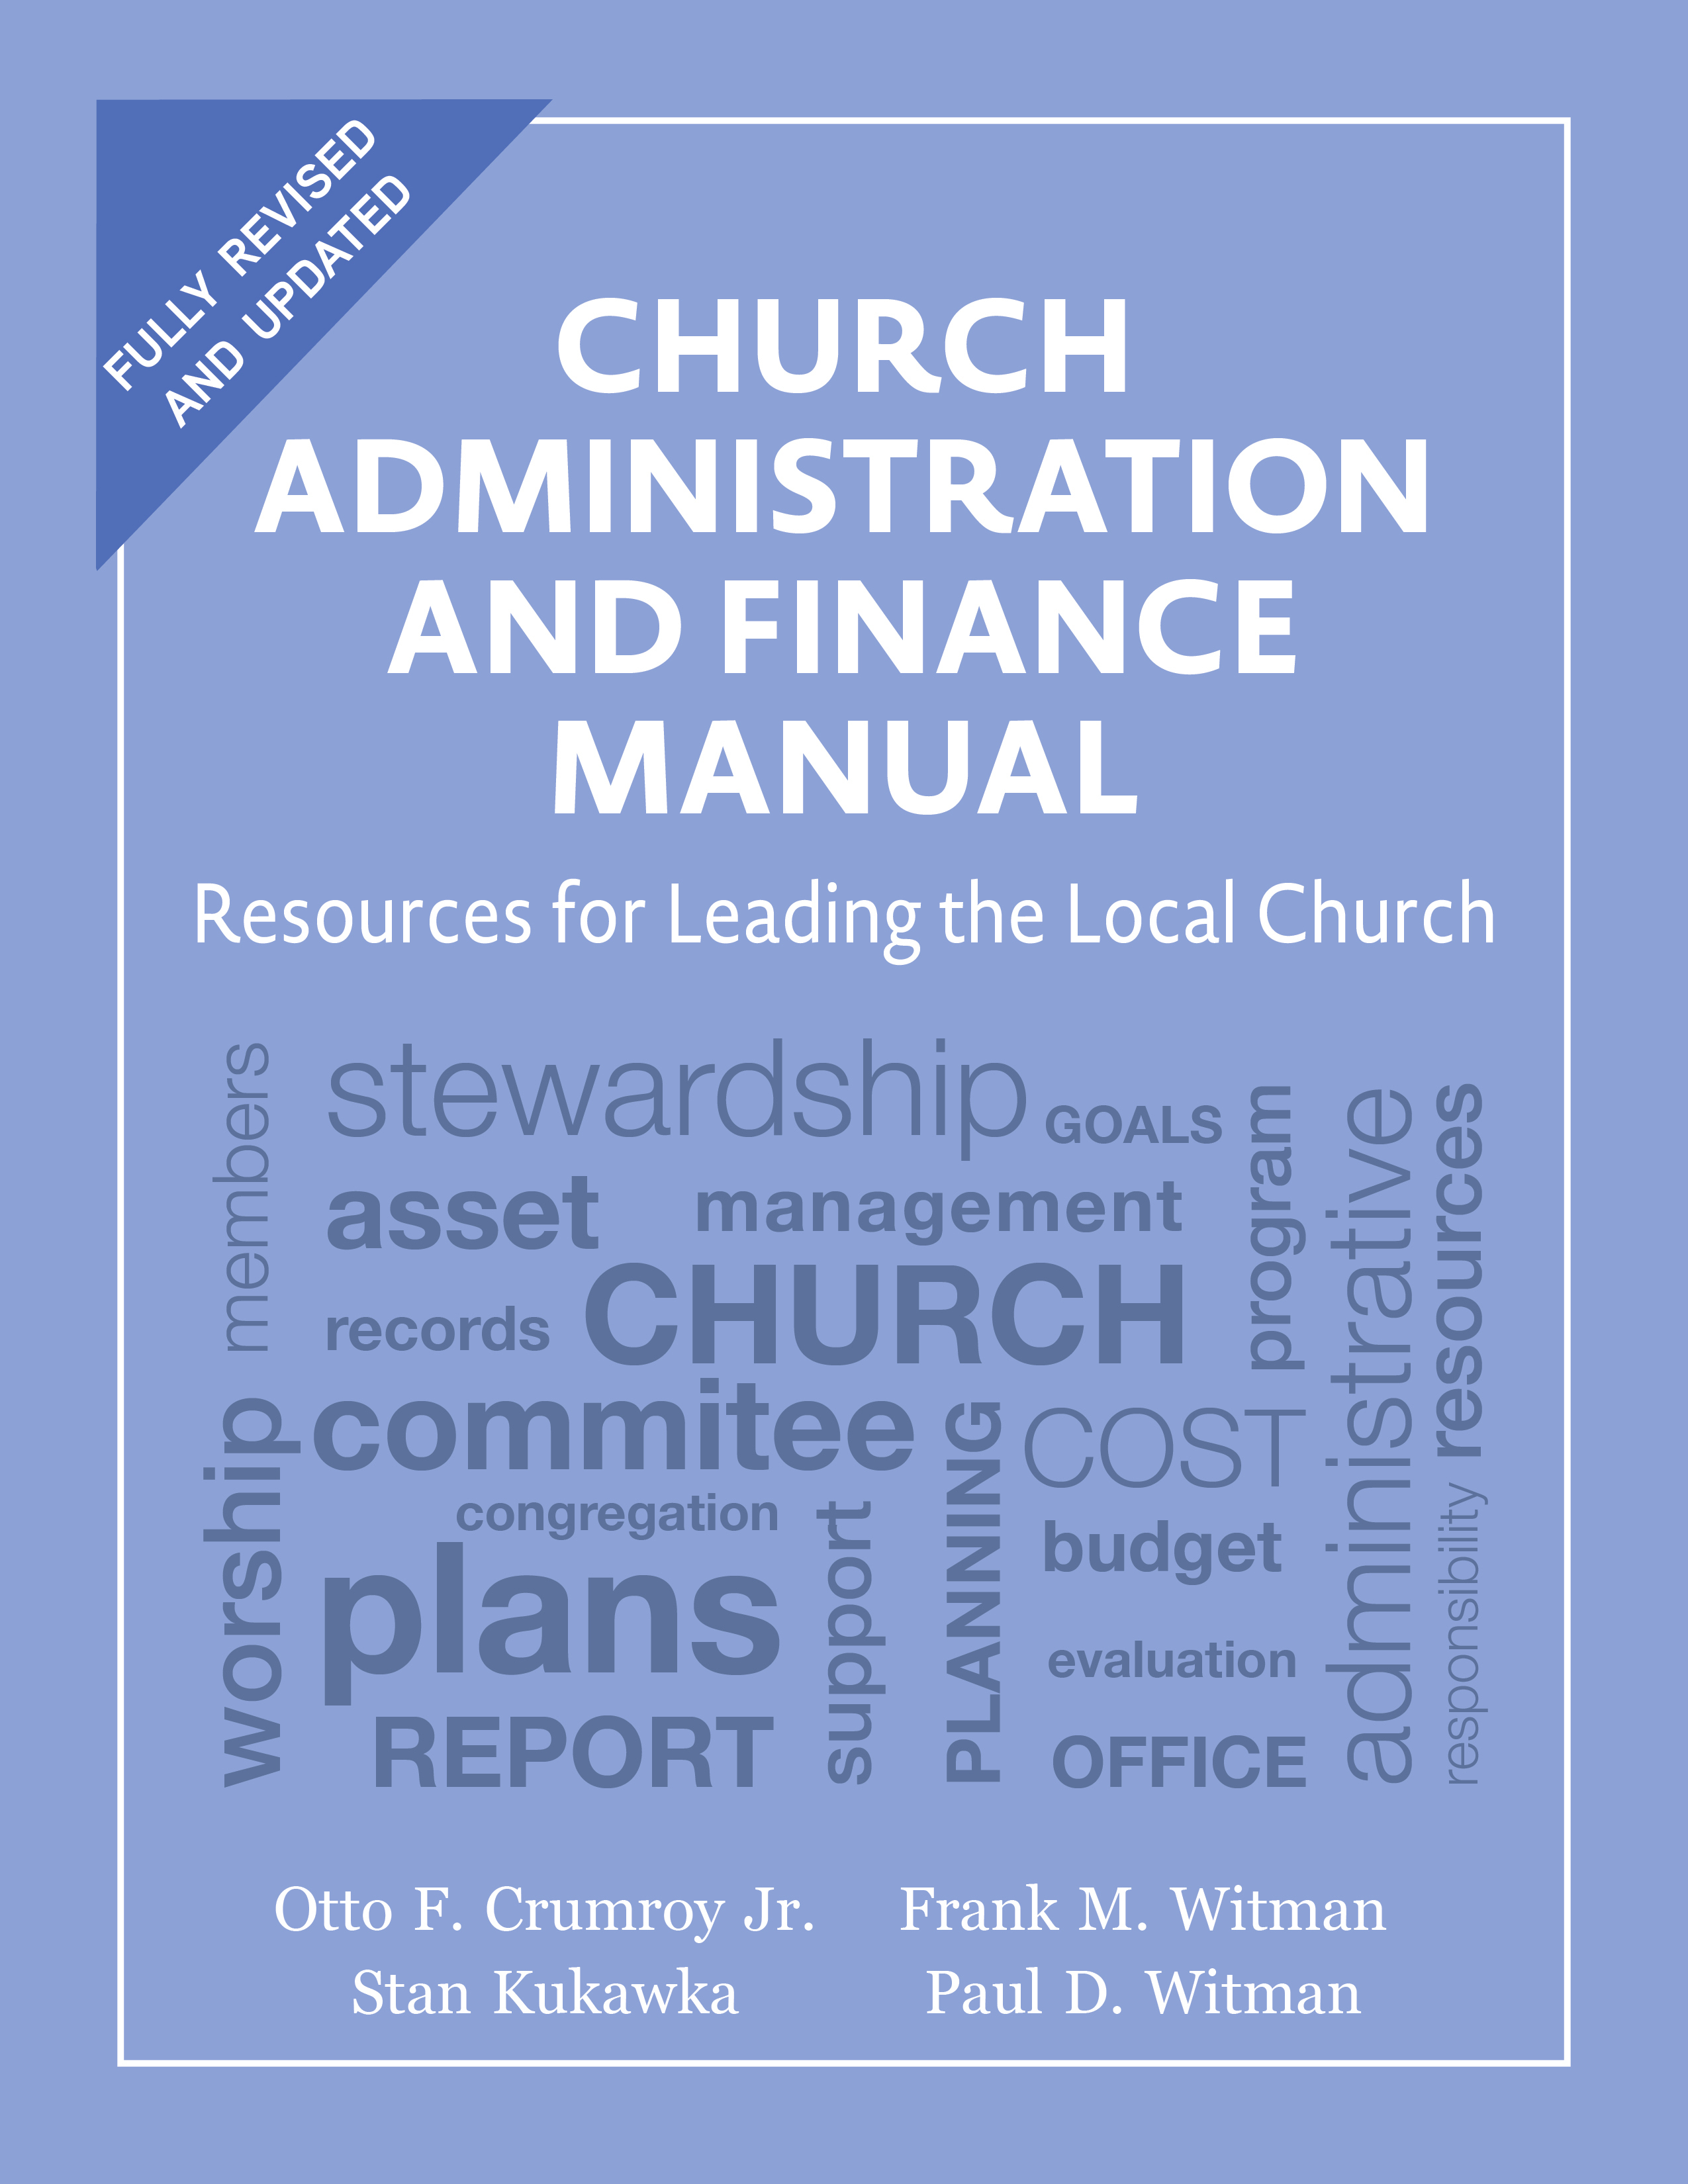 thesis on church administration pdf